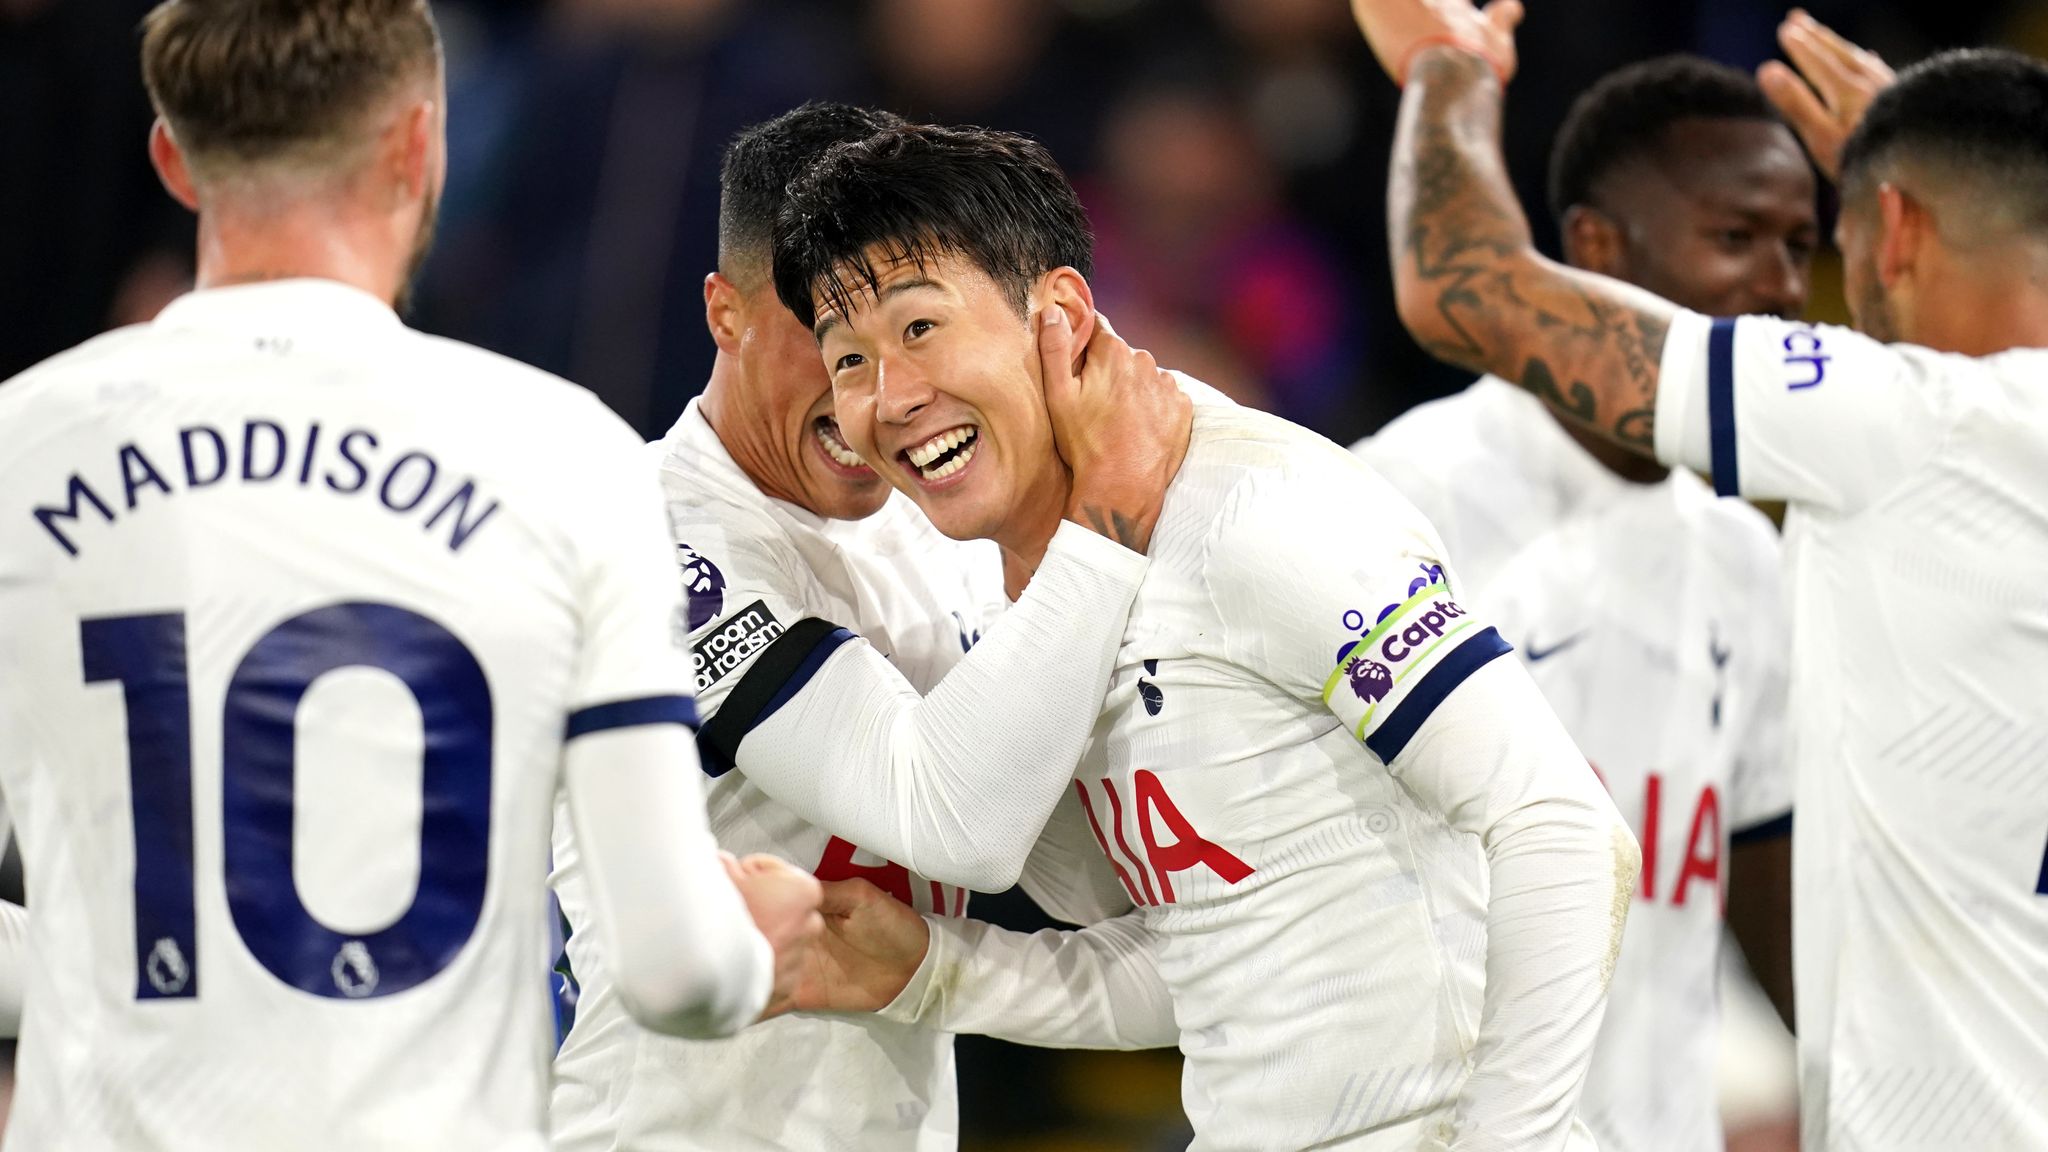 Goals and Highlights: Crystal Palace 1-2 Tottenham in Premier